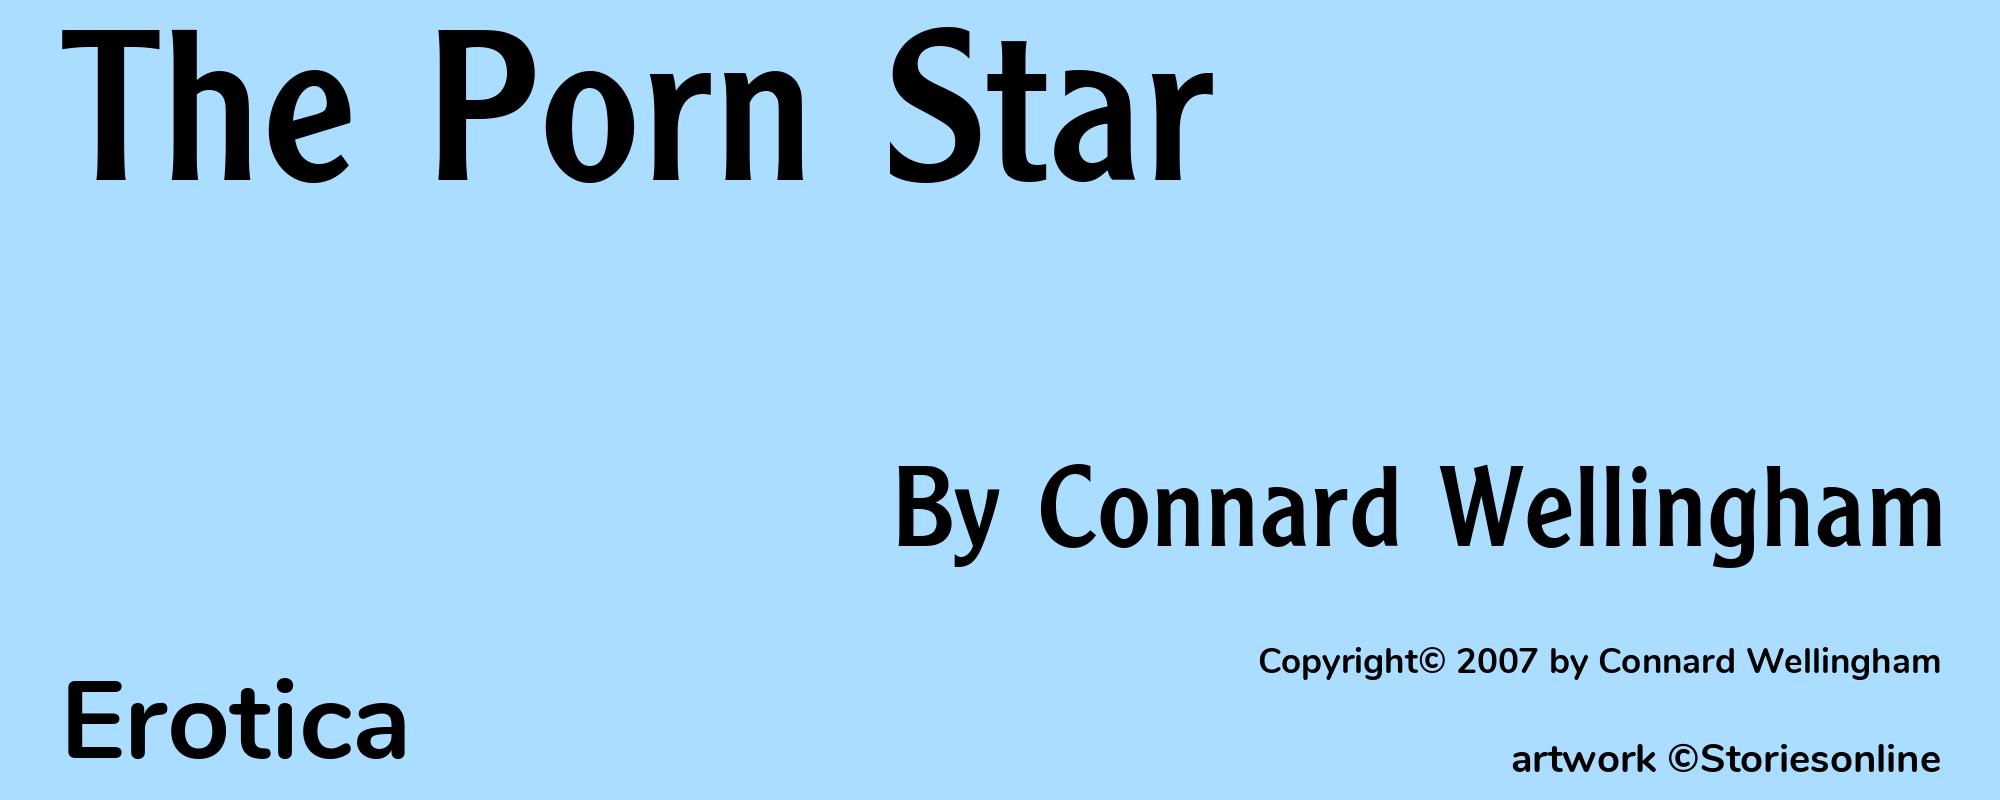 The Porn Star - Cover